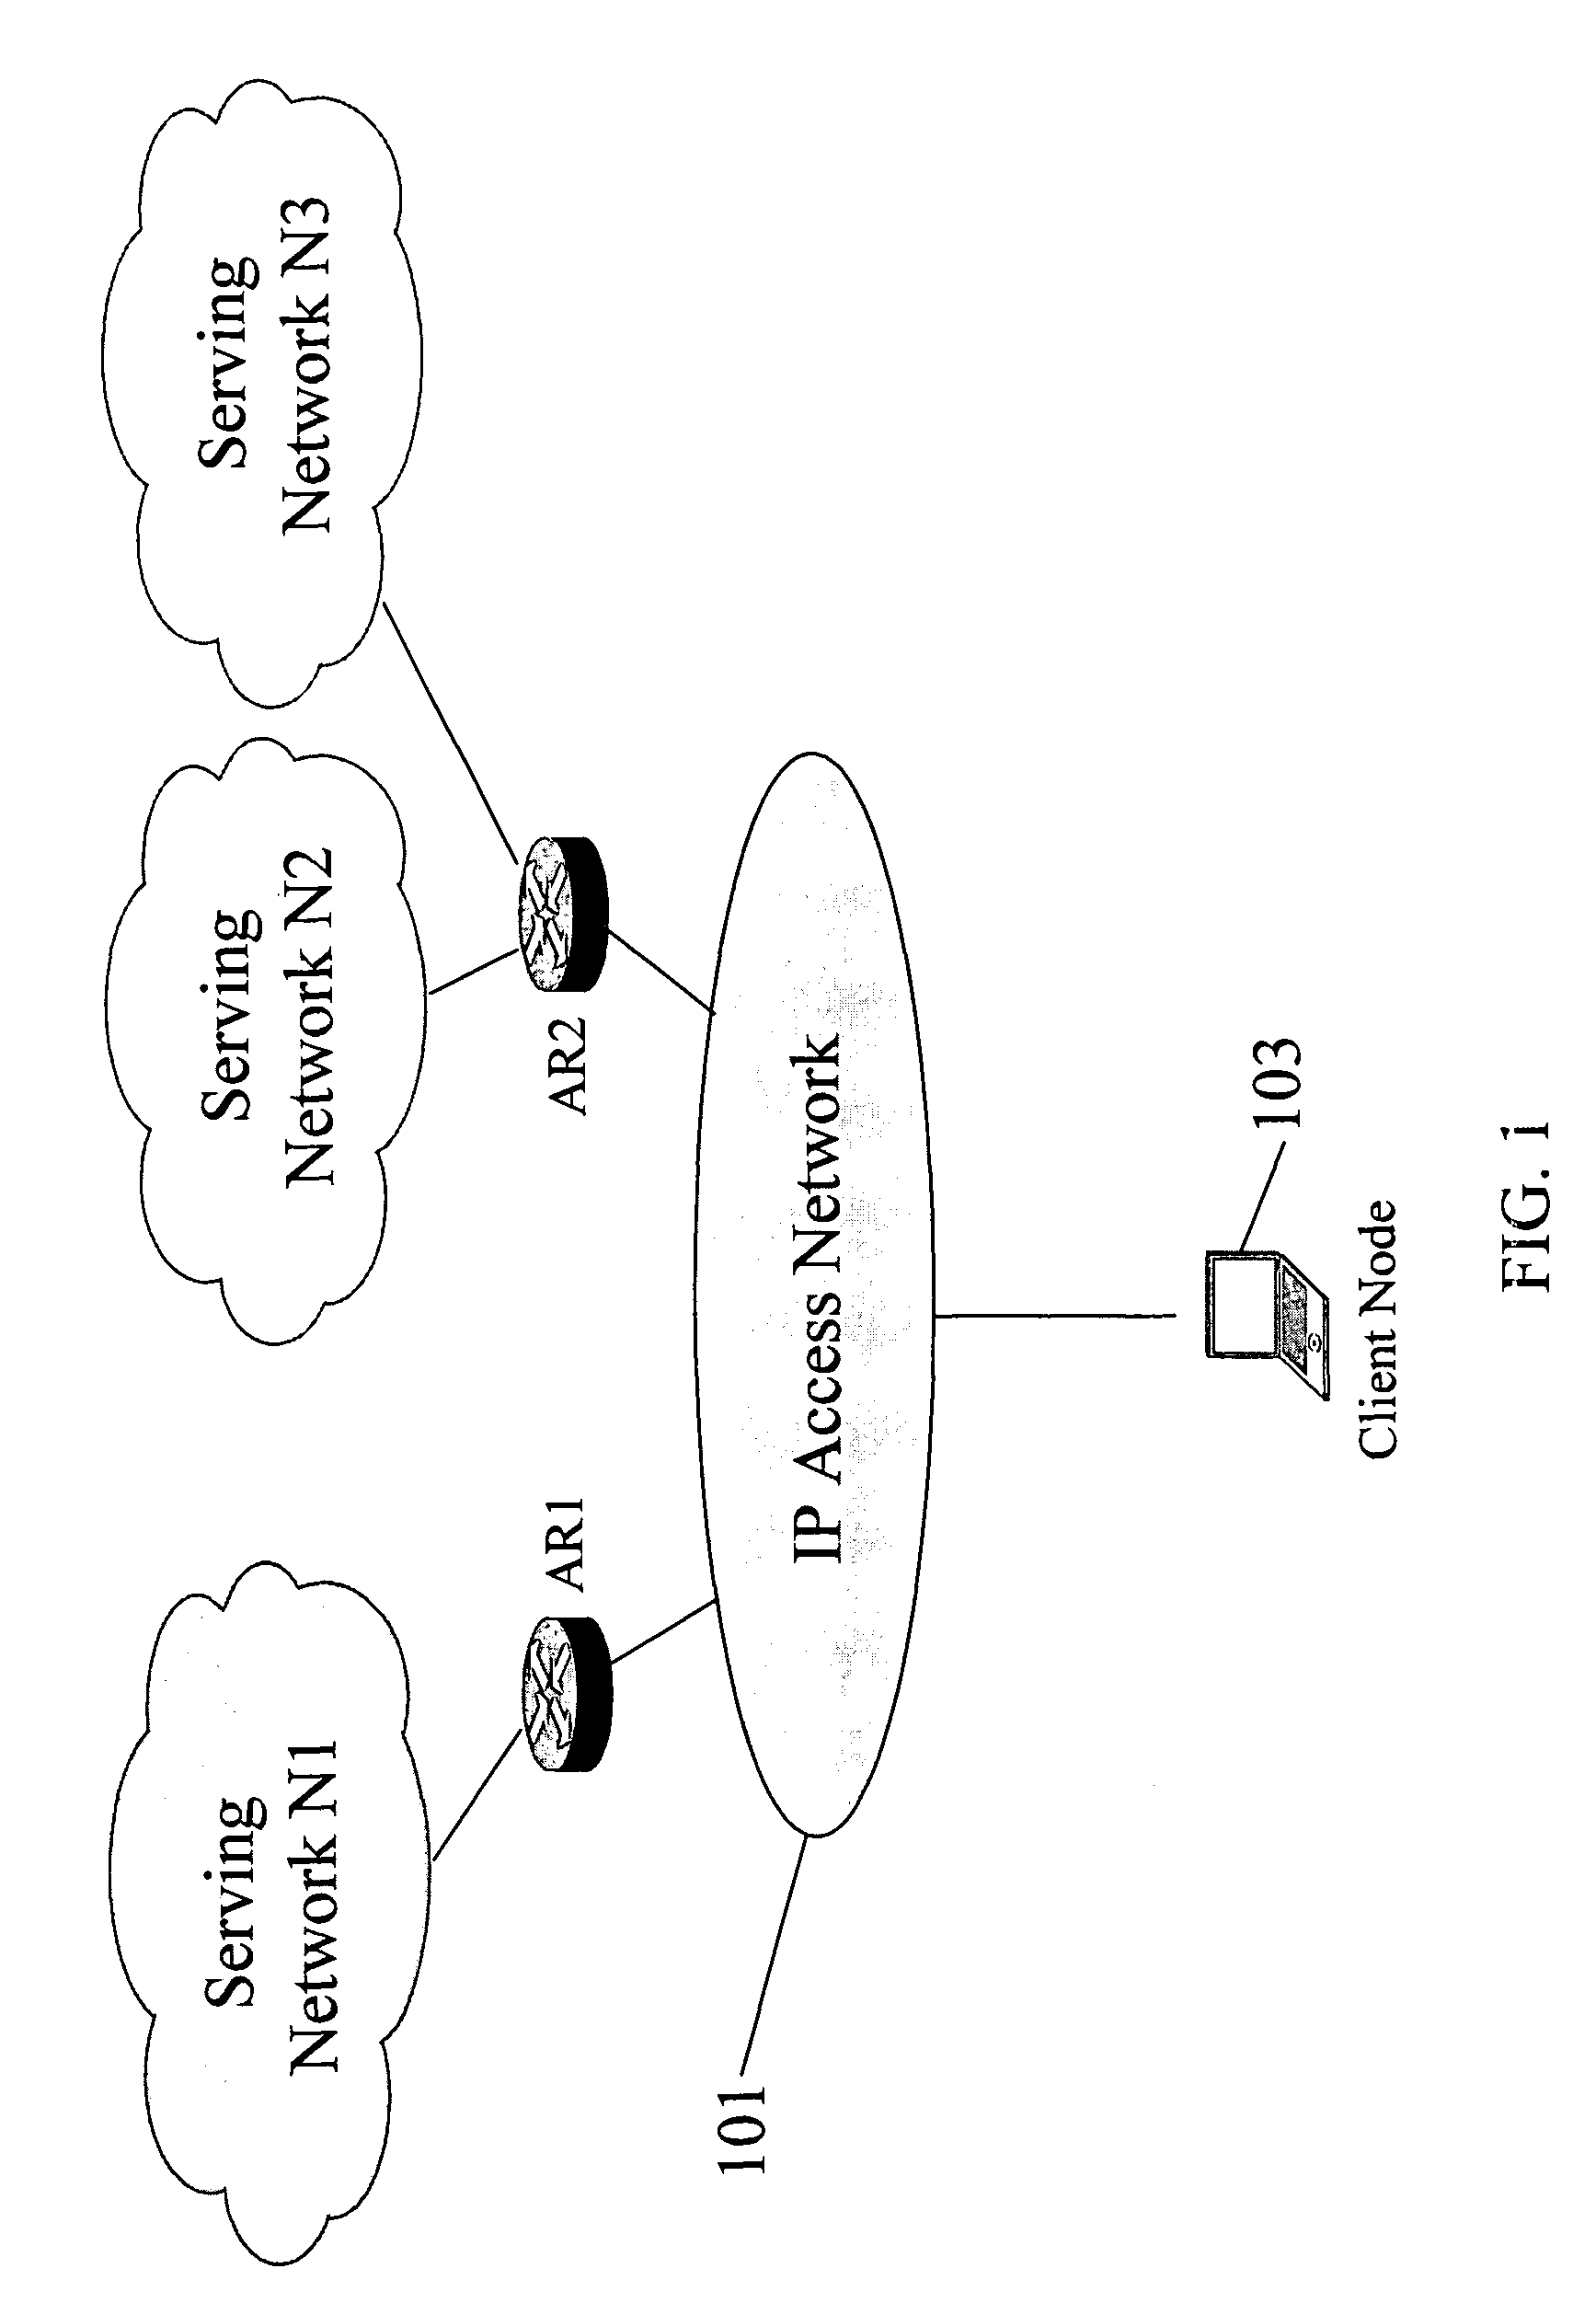 Establishing a secure tunnel to access router